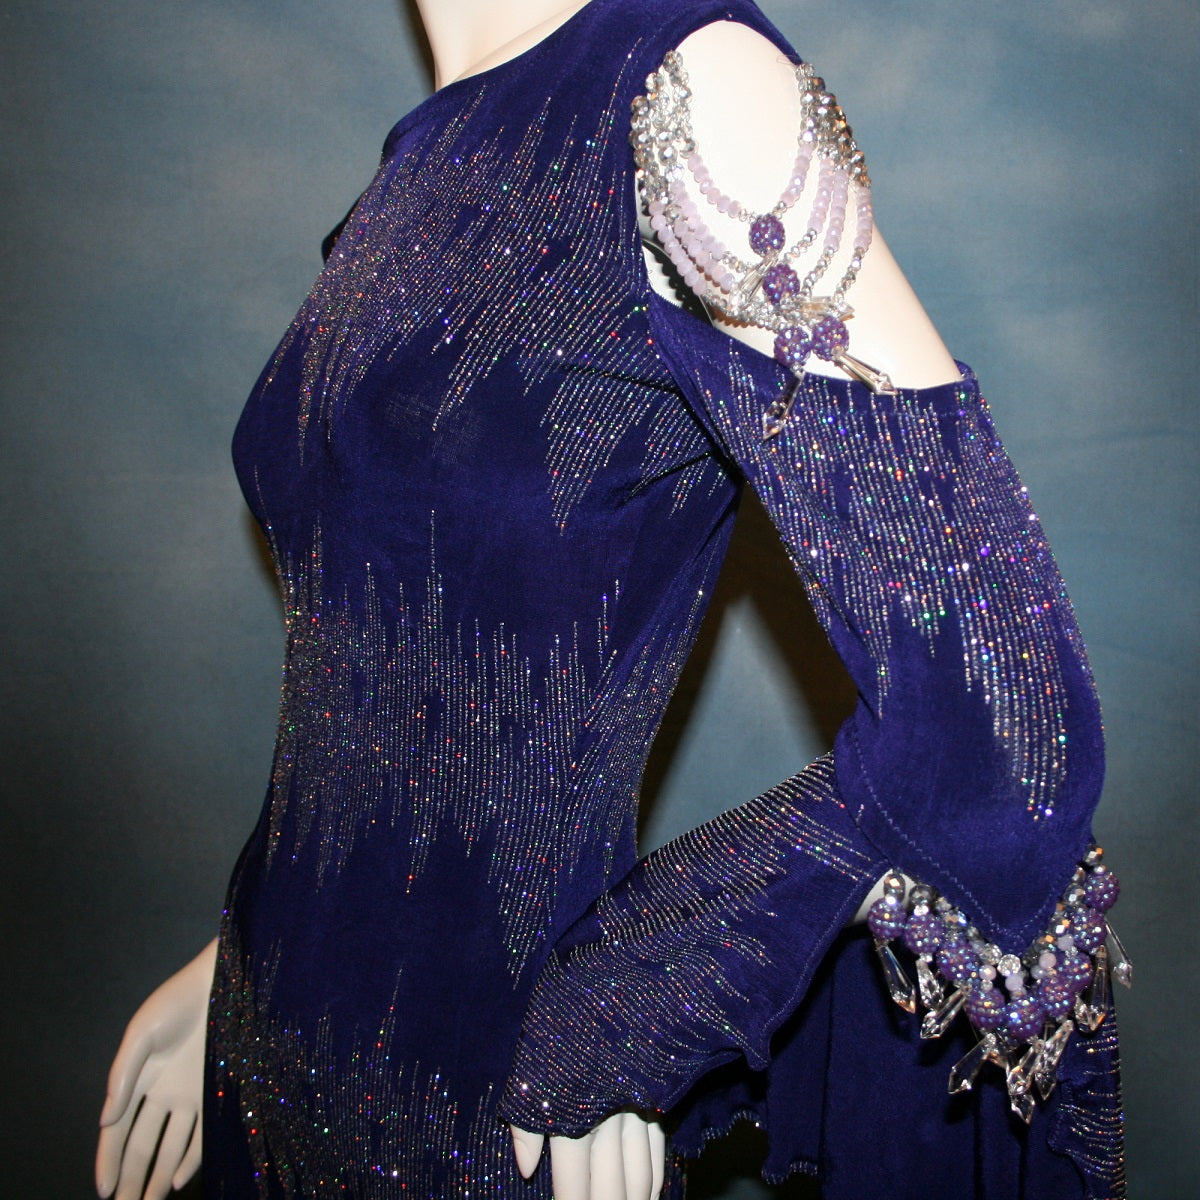 close view of details on Deep royal purple Latin/rhythm/tango dress created in deep royal purple glitter slinky with an awesome electrifying glitter pattern features one longe sleeve, with flair at the bottom, & another very interesting cold shoulder detailed one with hand beading & a flaired flounce.